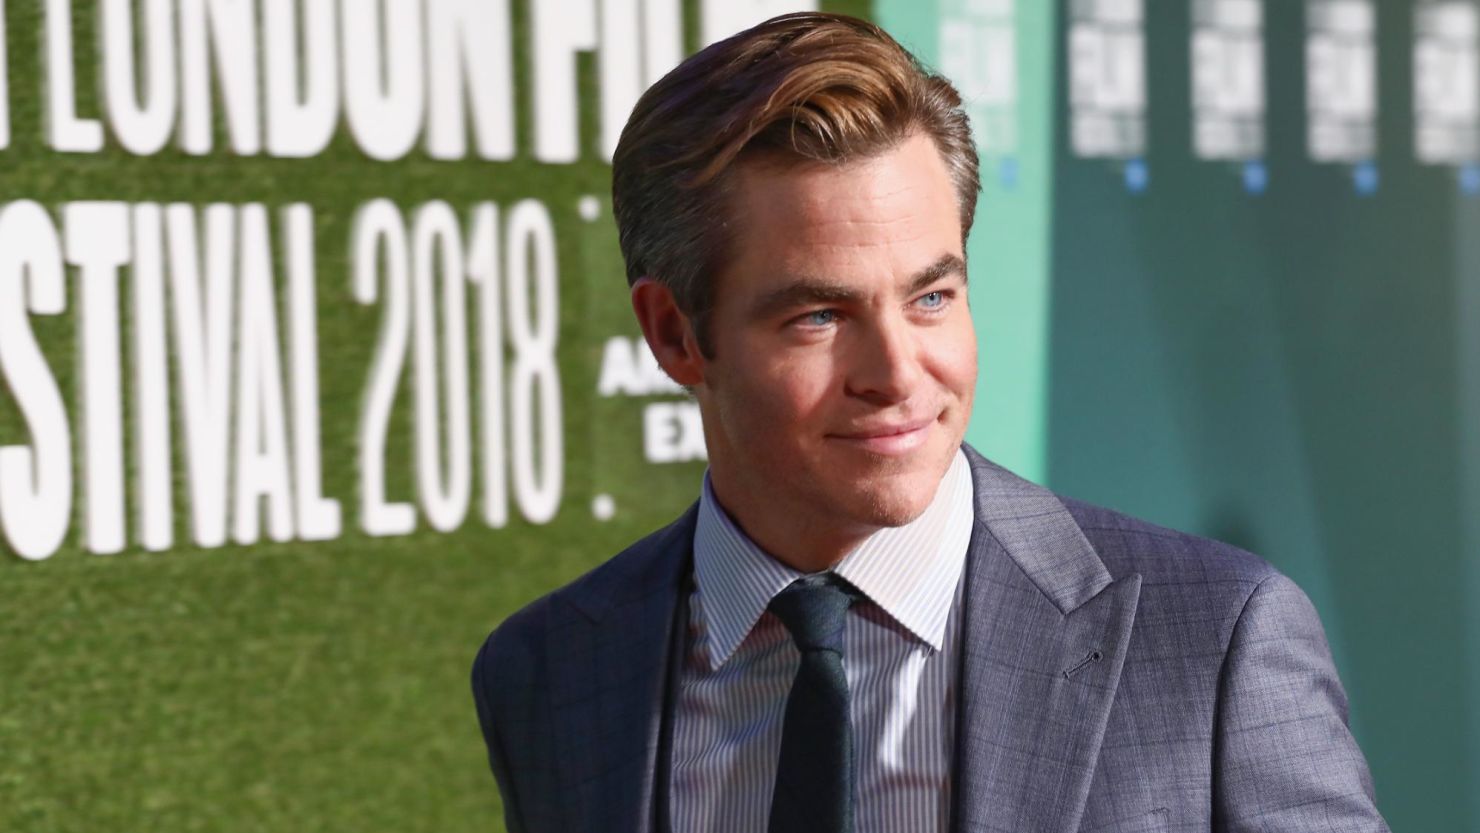 The news of Chris Pine's full frontal scene has sparked a Twitter storm.